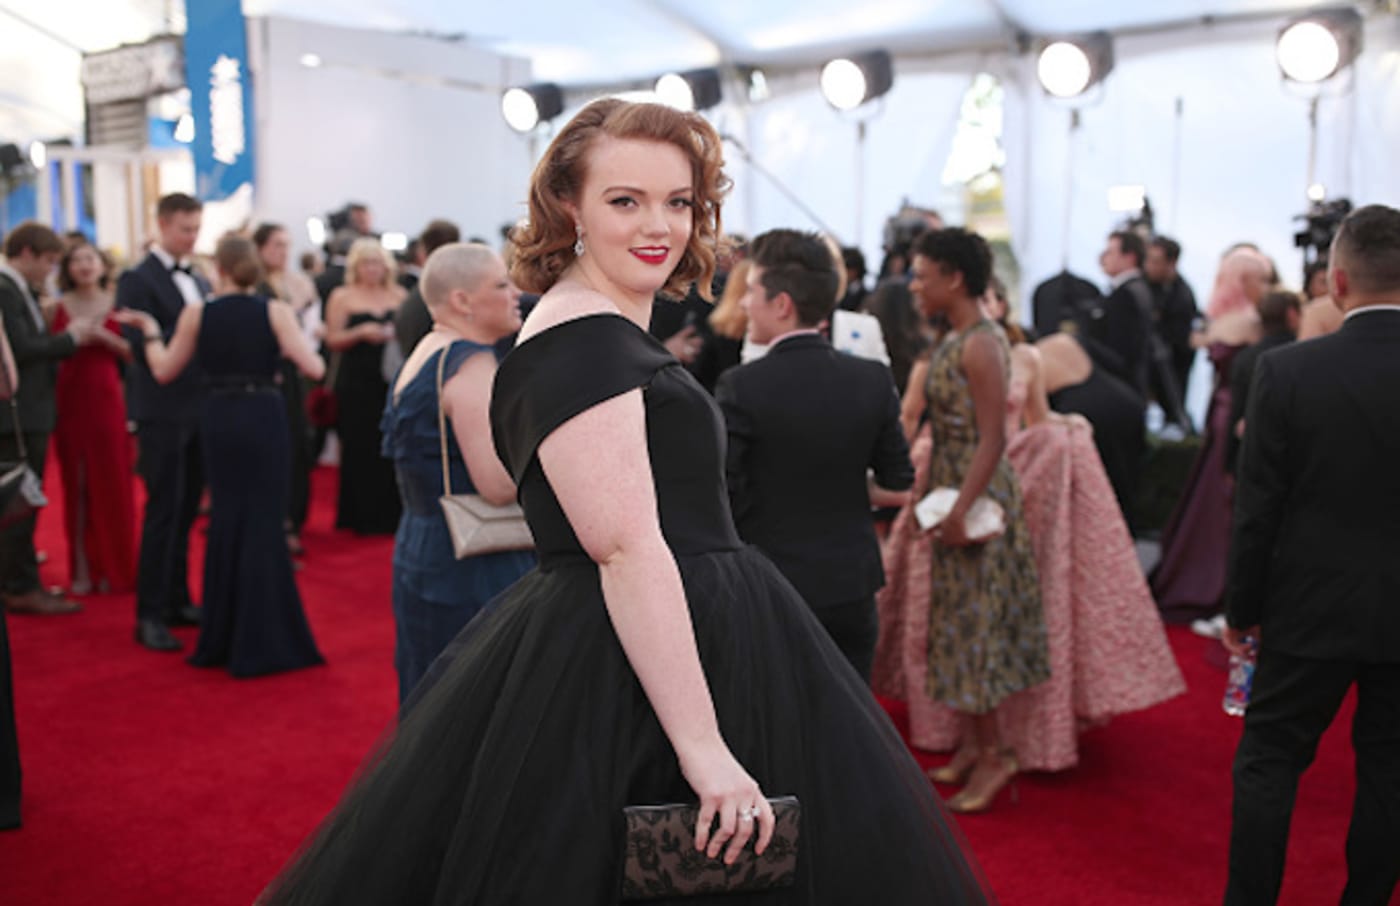 Shannon Purser attends The 23rd Annual Screen Actors Guild Awards